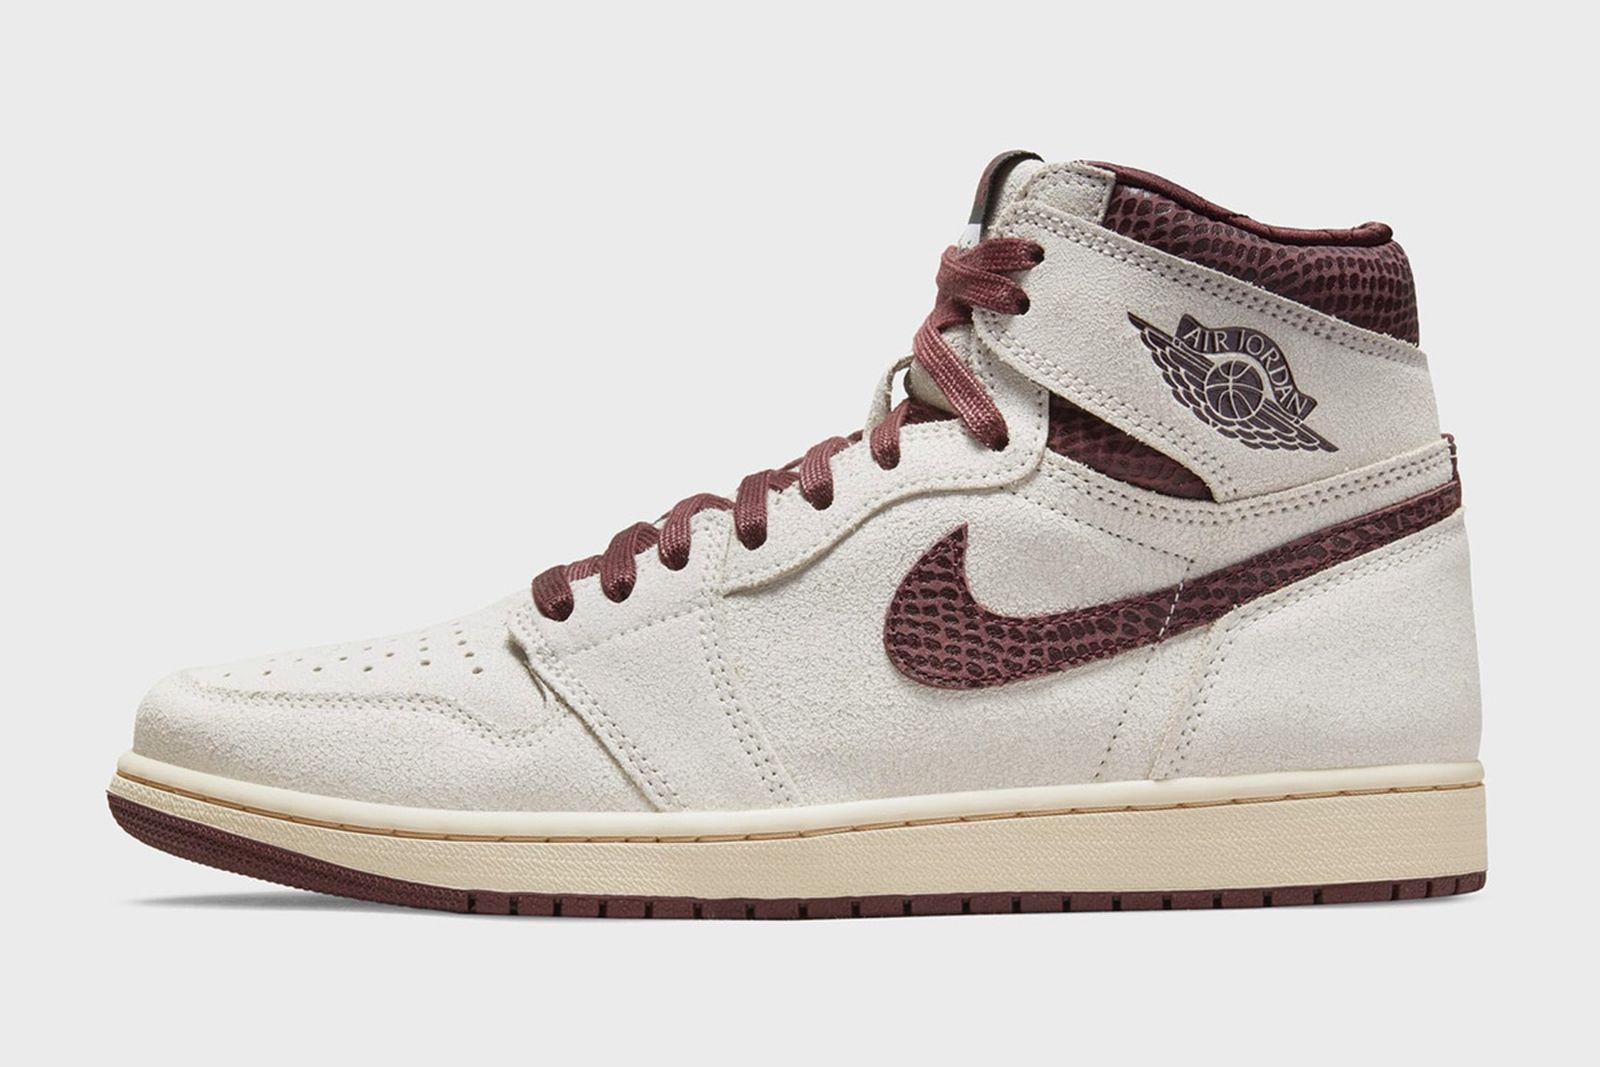 Nike Air Jordan 1 A Ma Maniére: Where to Buy & Resale Prices